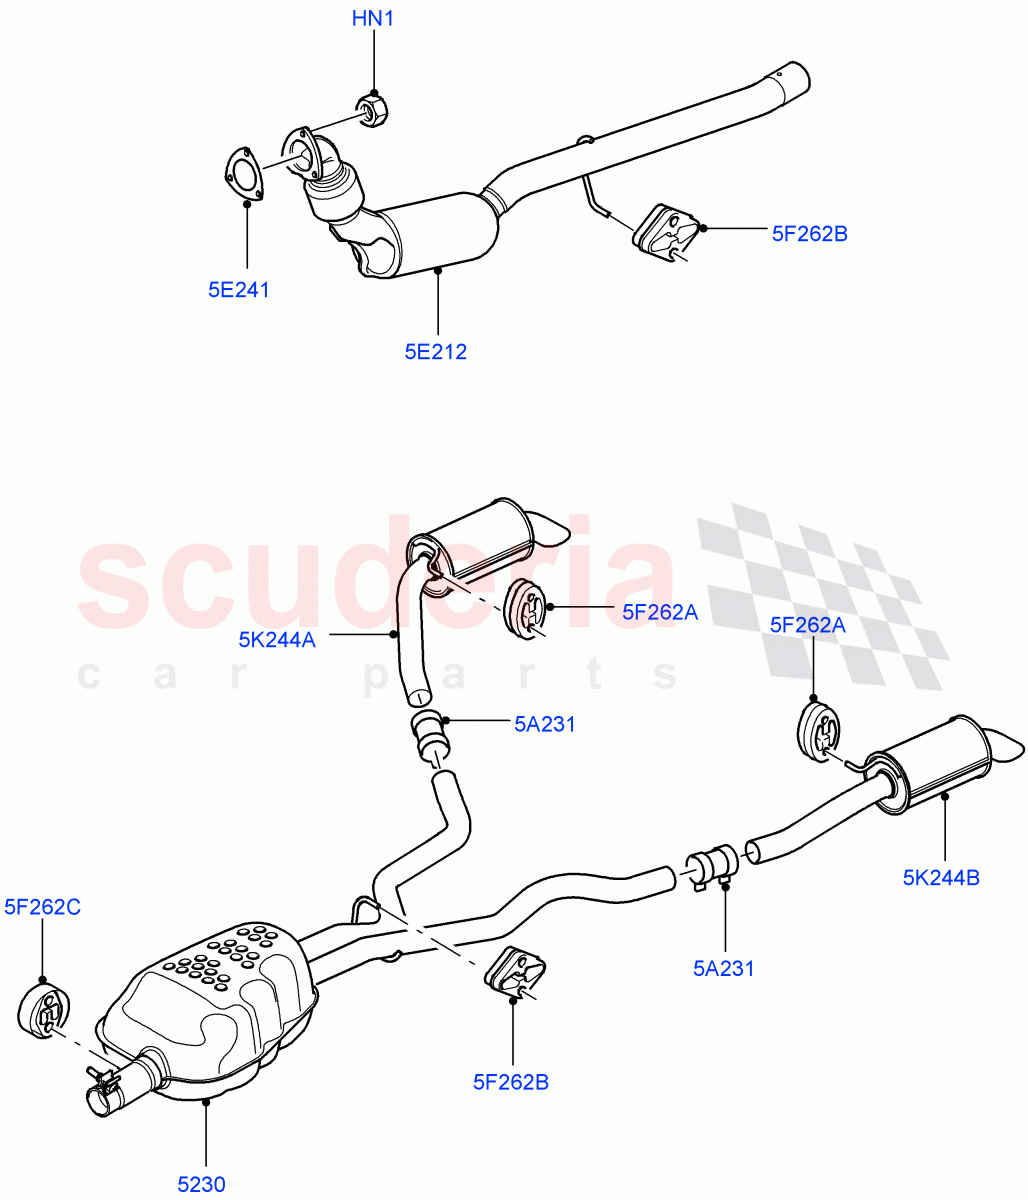 Exhaust System(Lion Diesel 2.7 V6 (140KW),Euro Consolidated Directive 3,Euro Stage 4 Emissions)((V)FROMAA000001) of Land Rover Land Rover Discovery 4 (2010-2016) [2.7 Diesel V6]